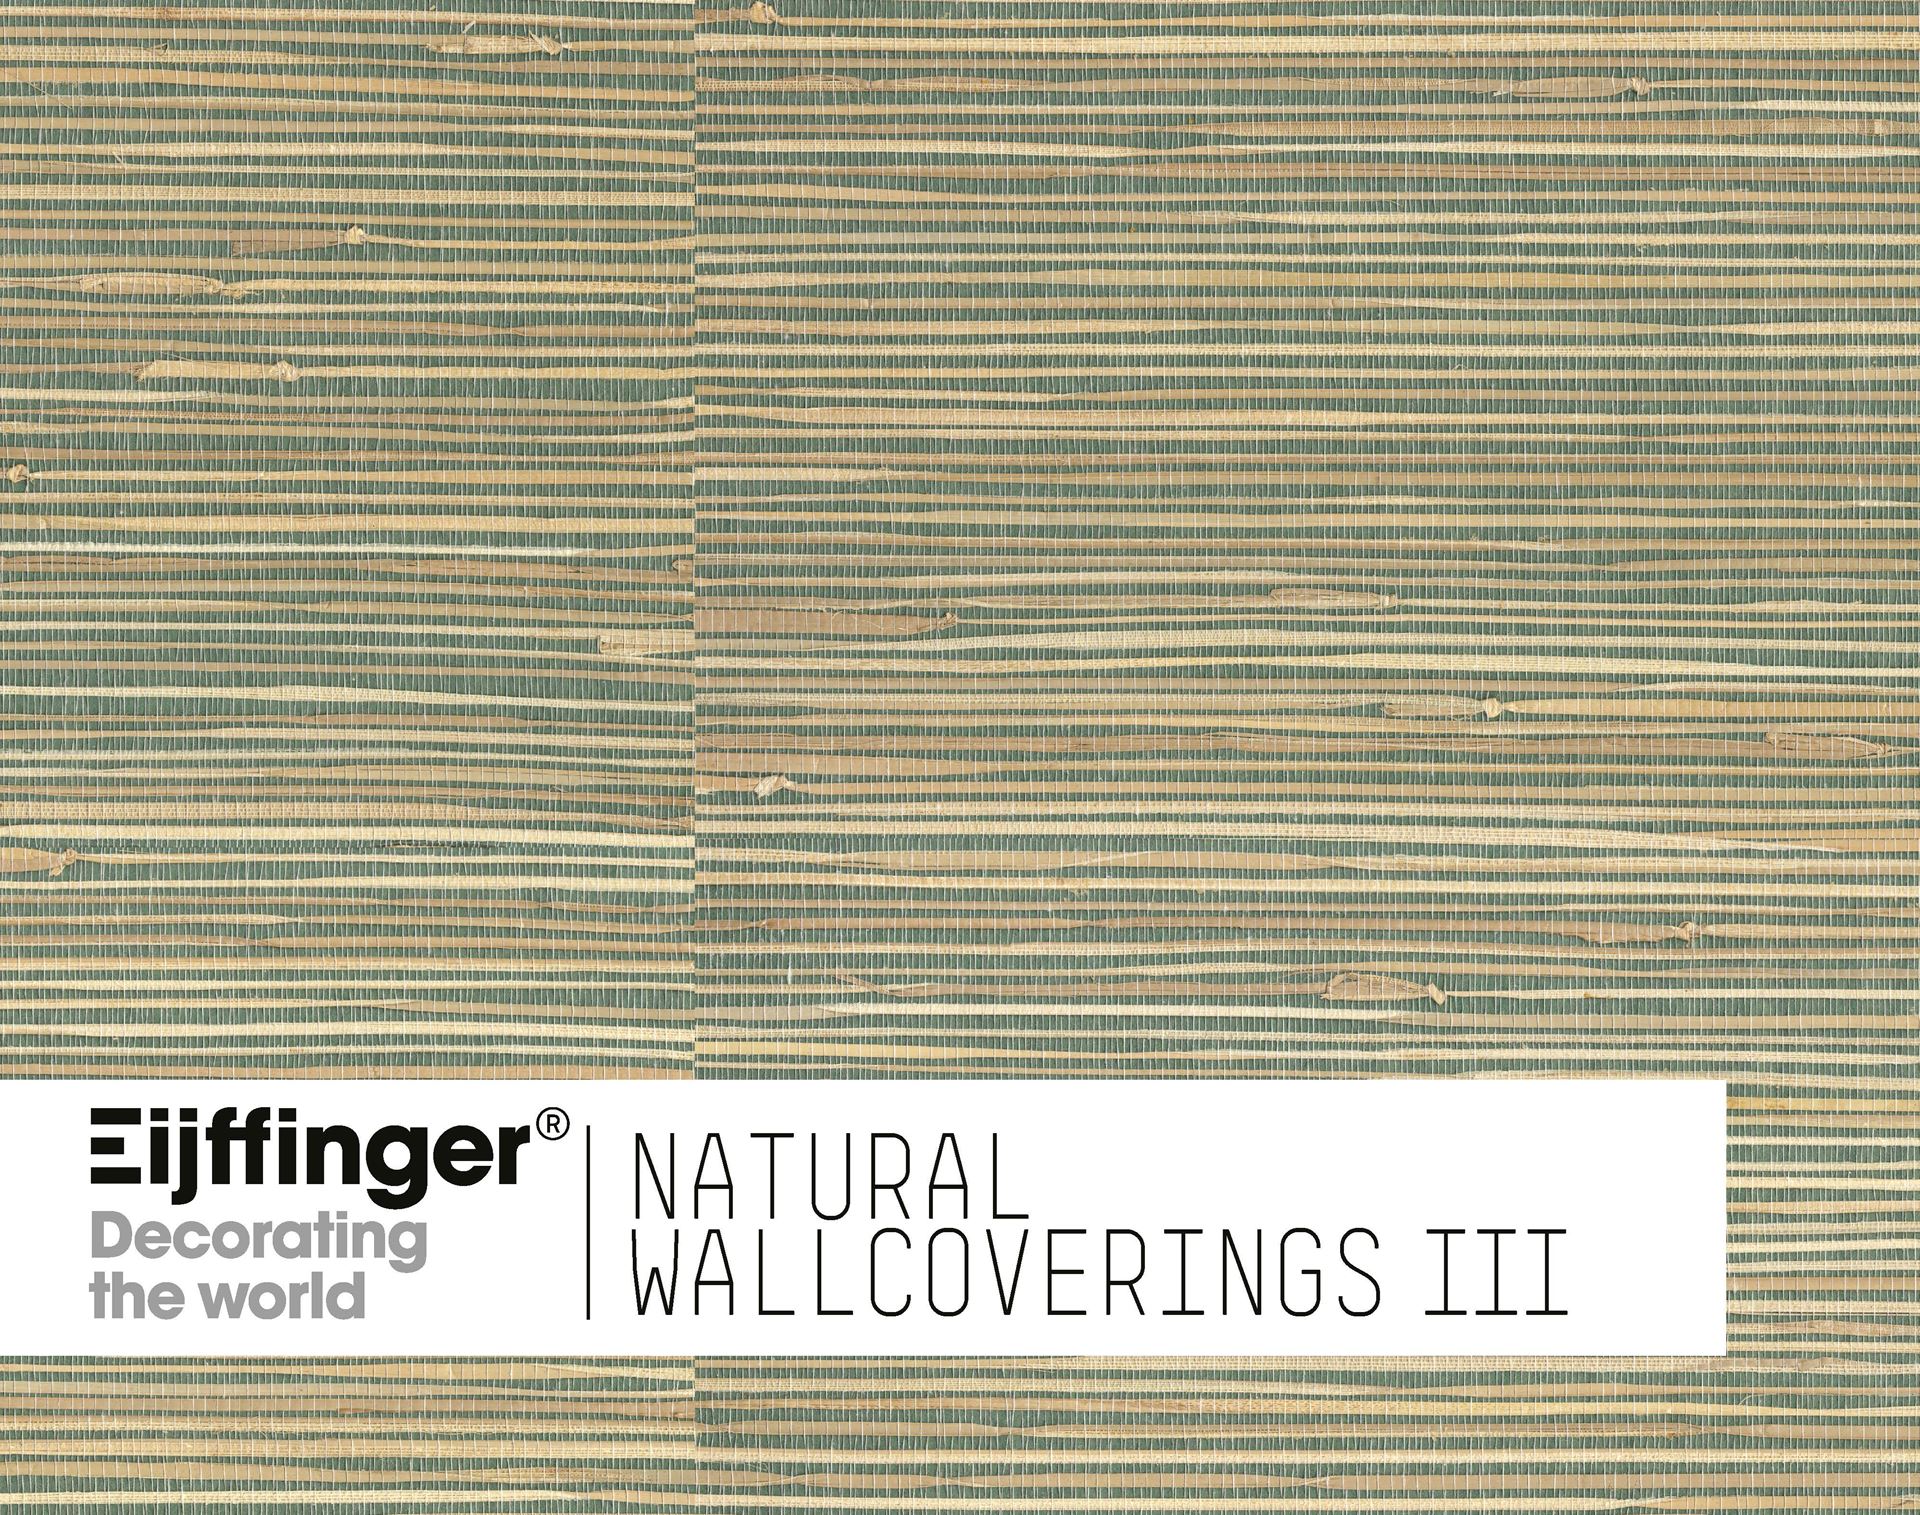 Root categorie - Natural Wallcoverings III